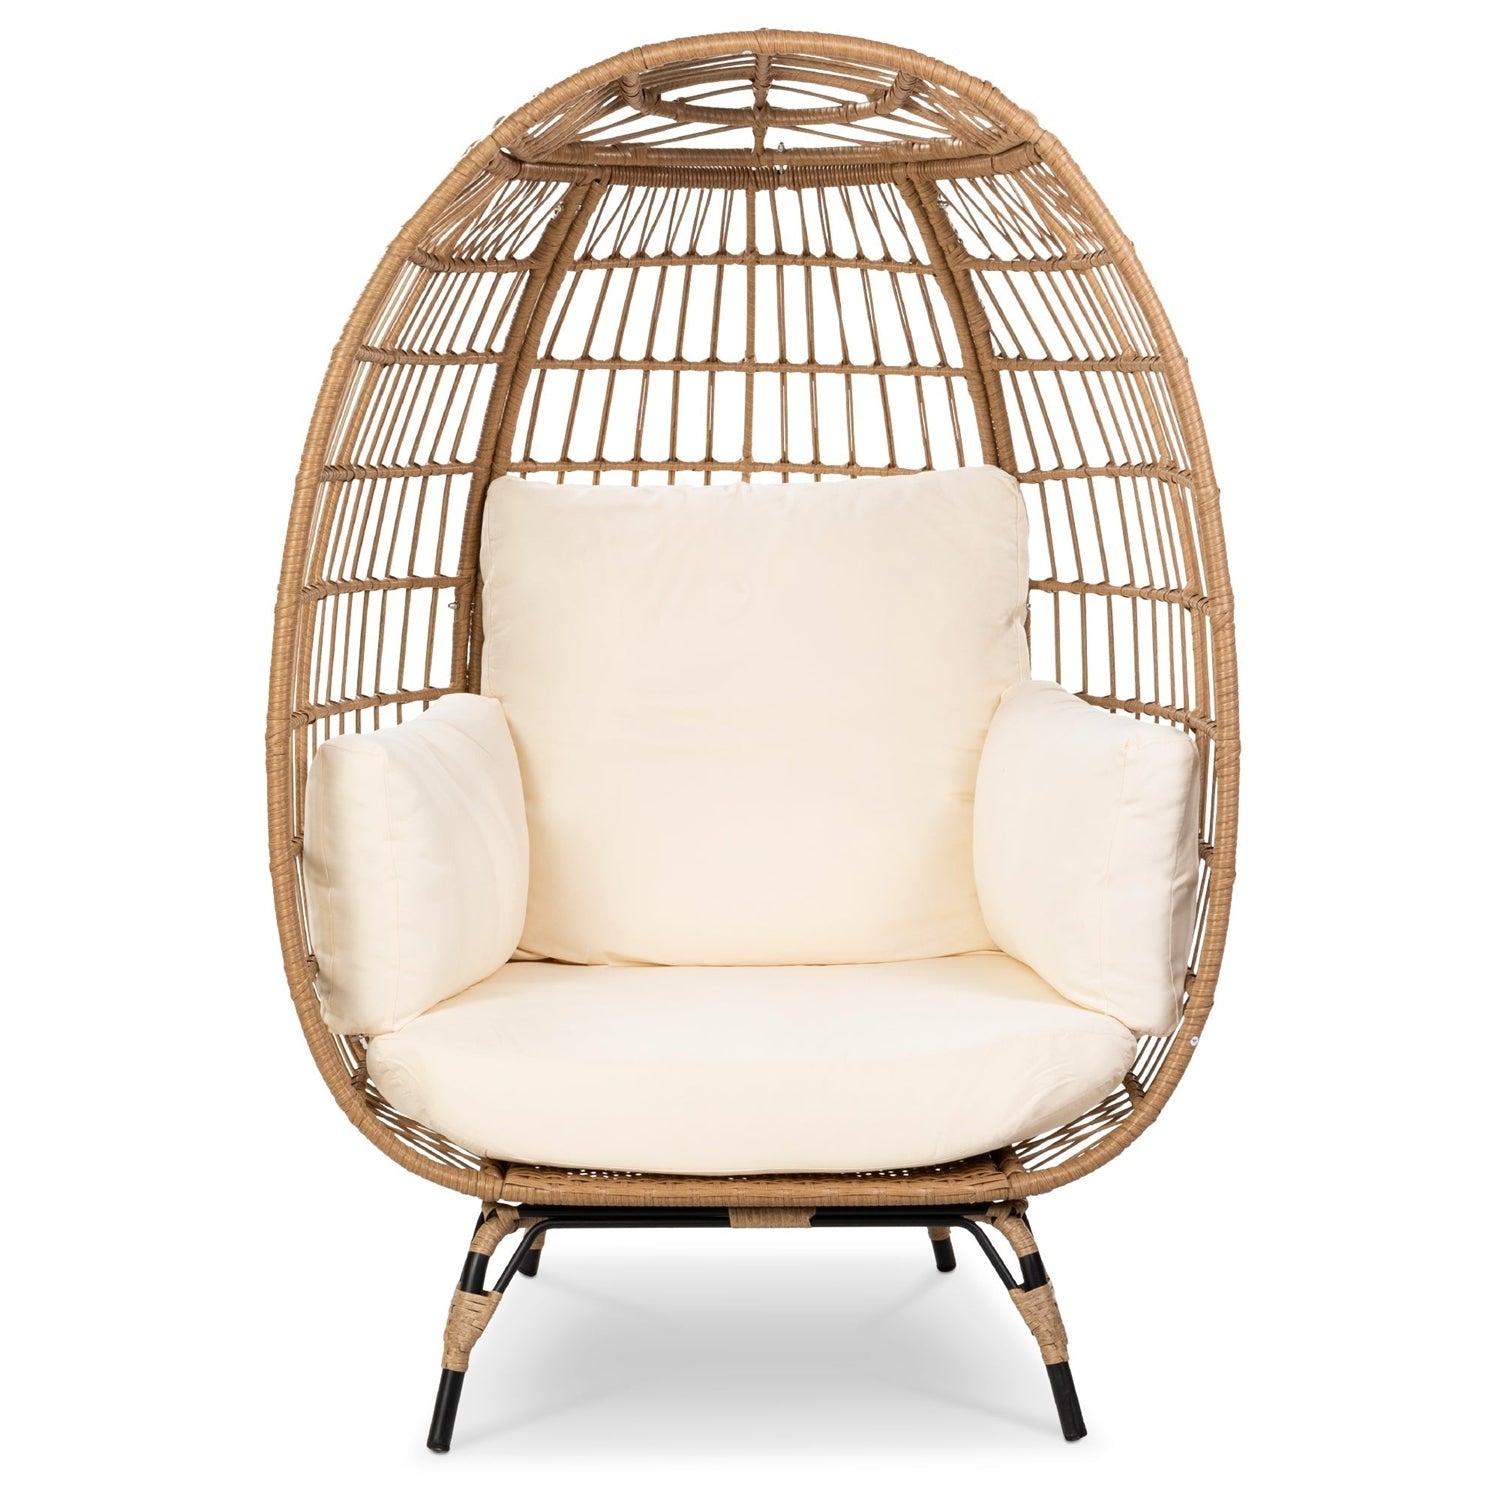 Oversized Patio Lounger Indoor/Outdoor Wicker Egg Chair Off White